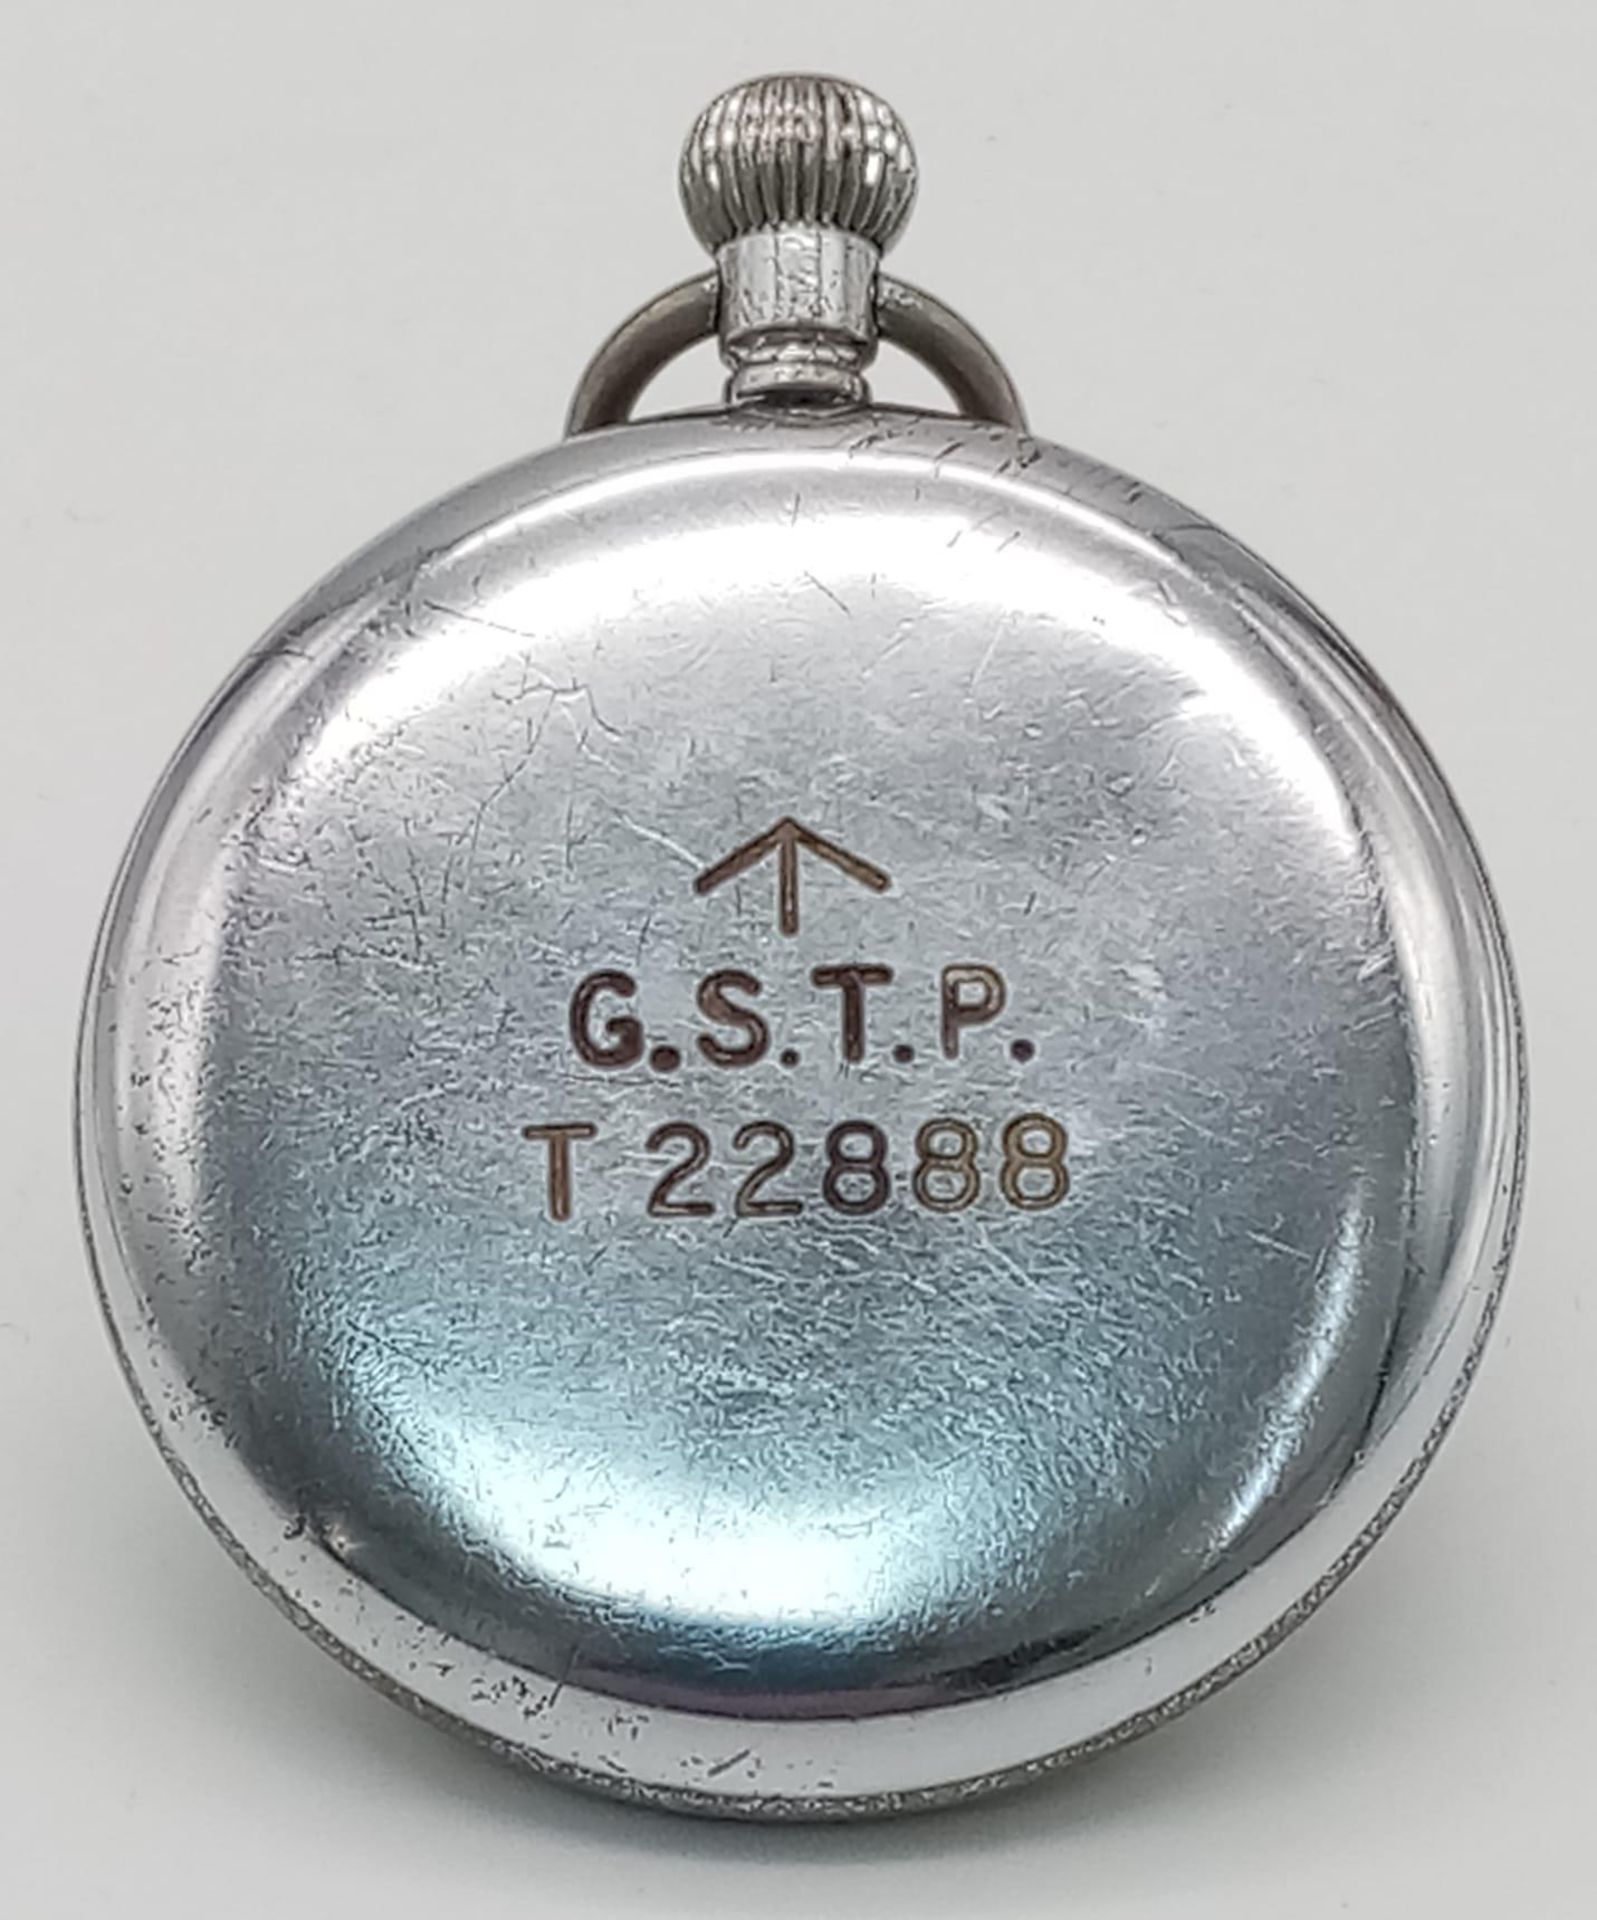 A Military CYMA pocket watch, 52 mm case, white dial with Arabic numerals and seconds sub-dial. - Image 4 of 6